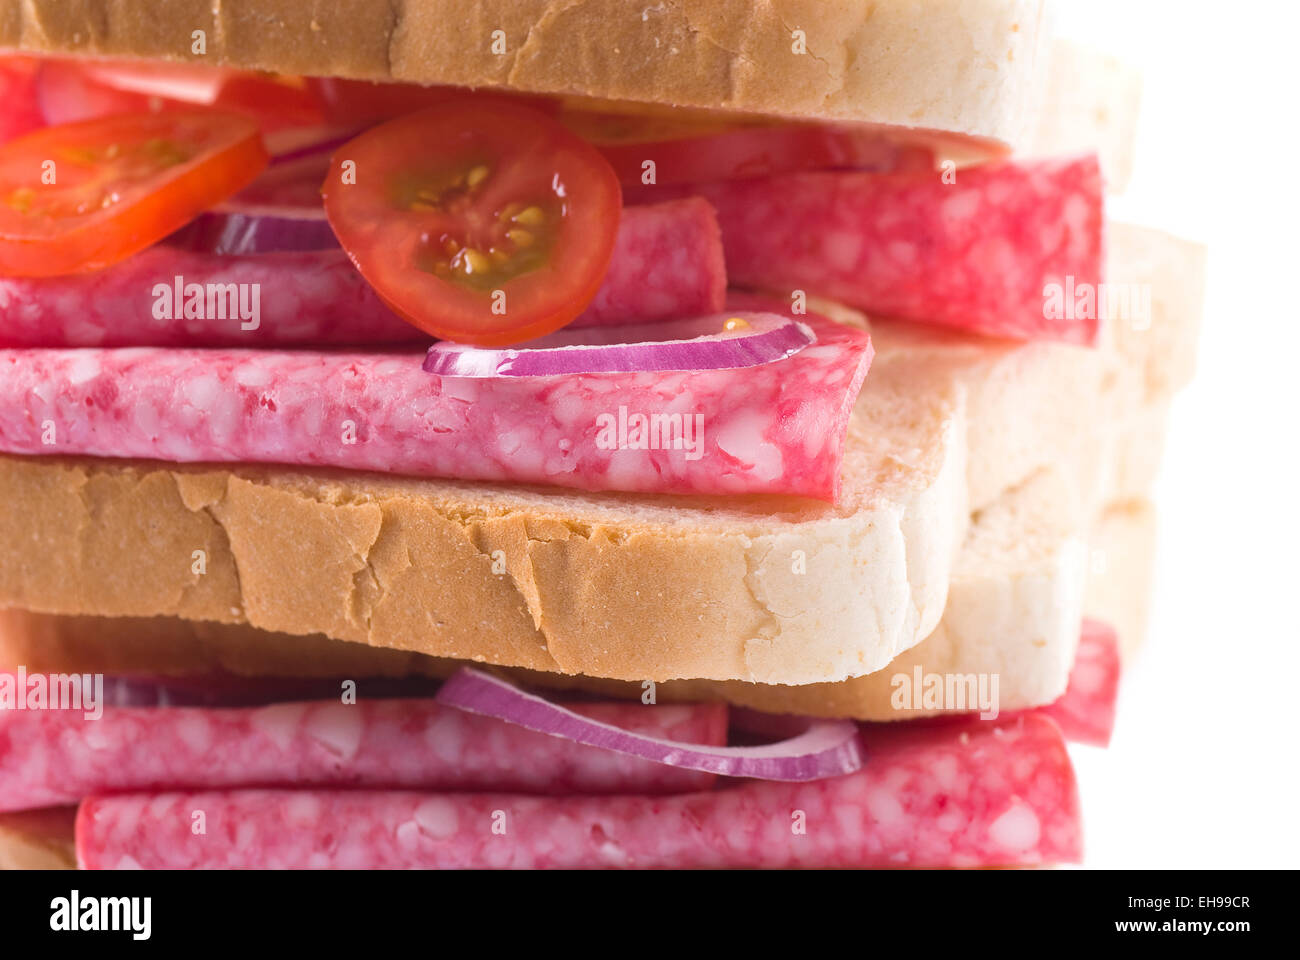 Salami sandwich with onion and tomato. Stock Photo